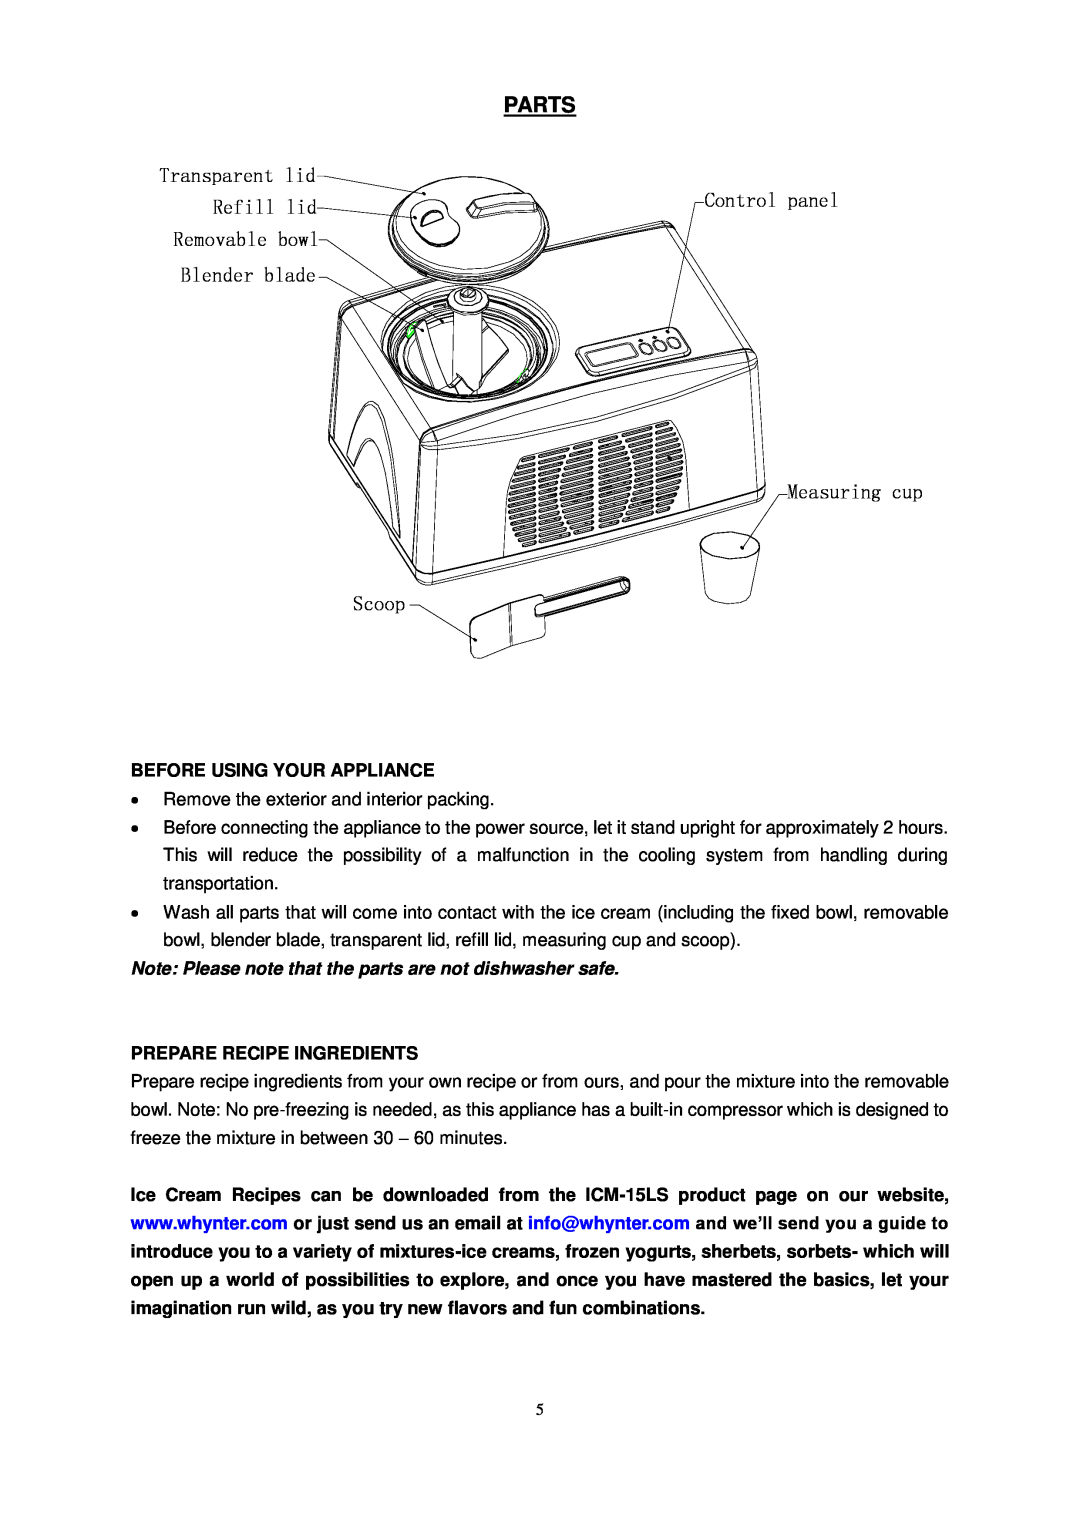 Whynter ICM-15LS Parts, Before Using Your Appliance, Note Please note that the parts are not dishwasher safe, Refill lid 